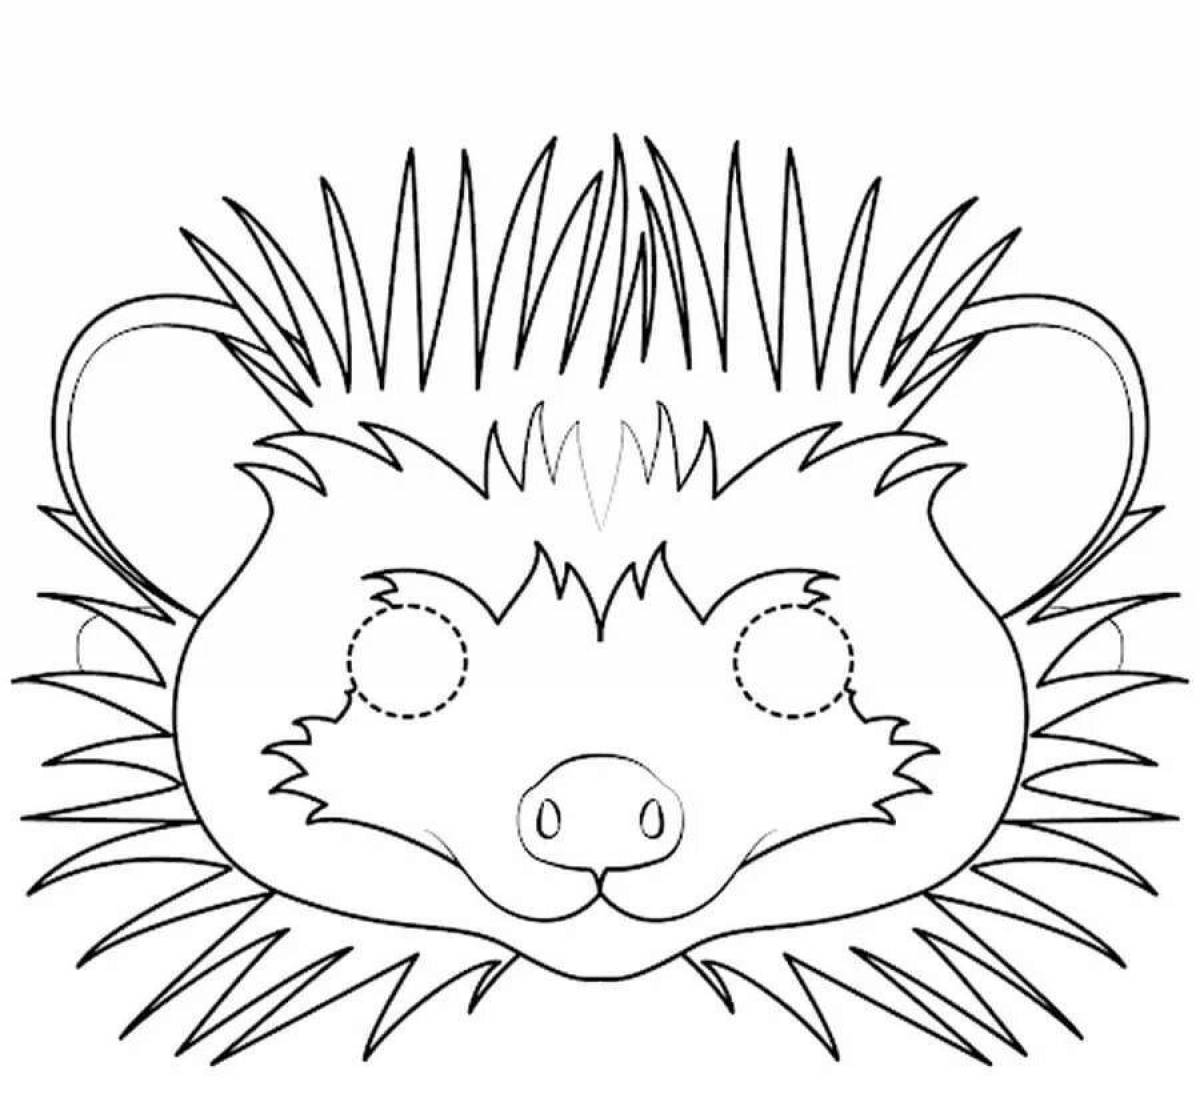 Cute and quirky hedgehog coloring book